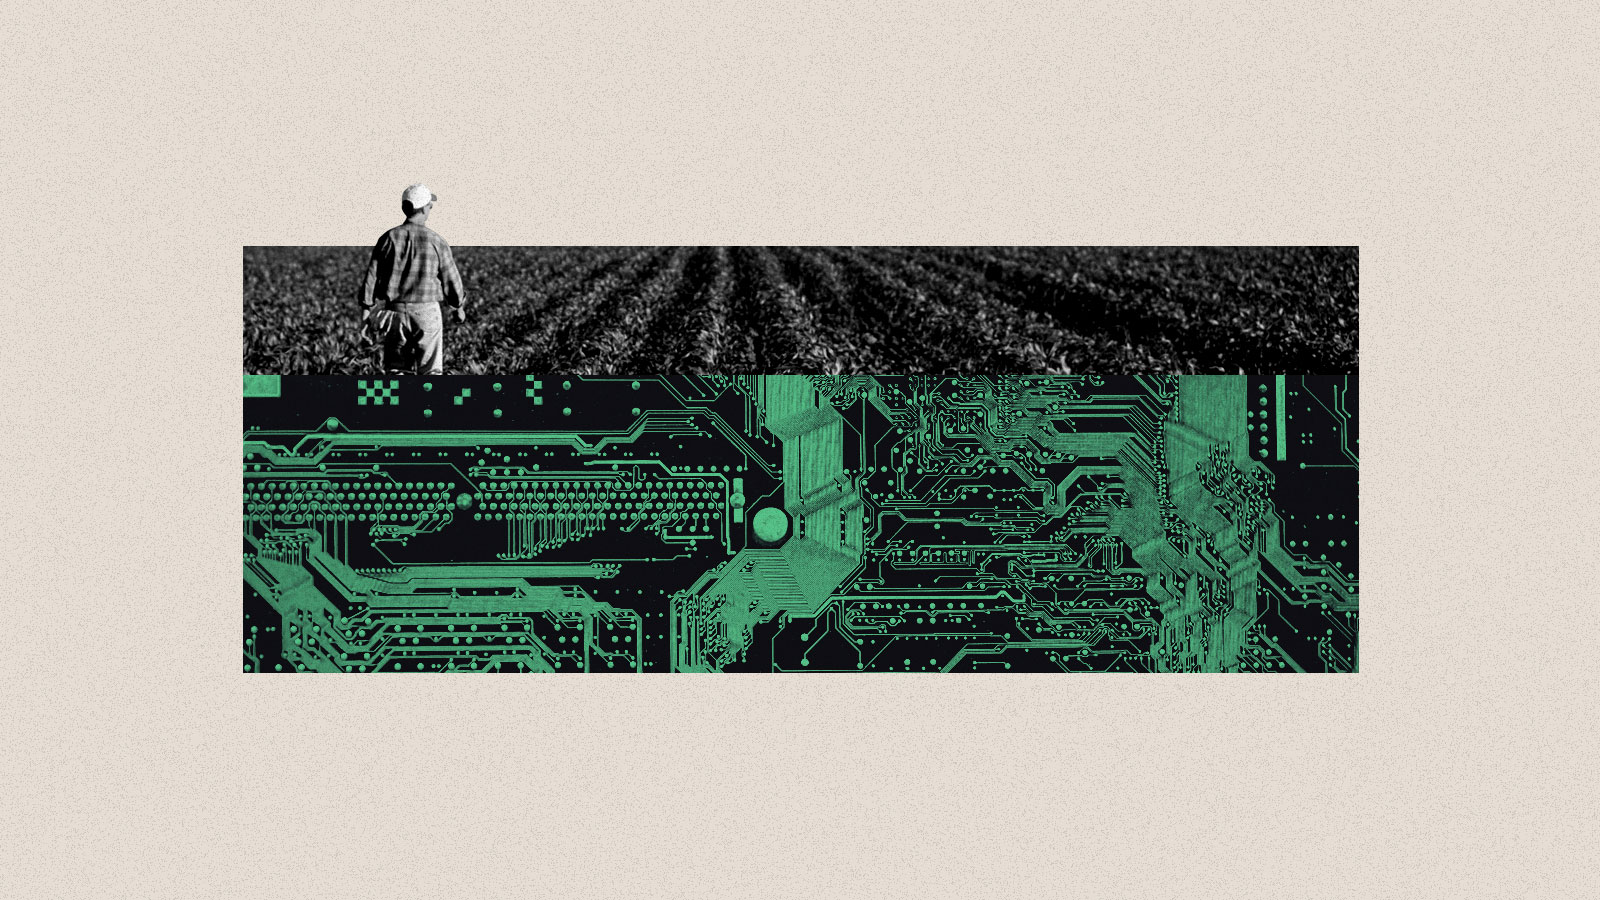 Collage of farmer standing in field with computer chip pattern beneath the crops